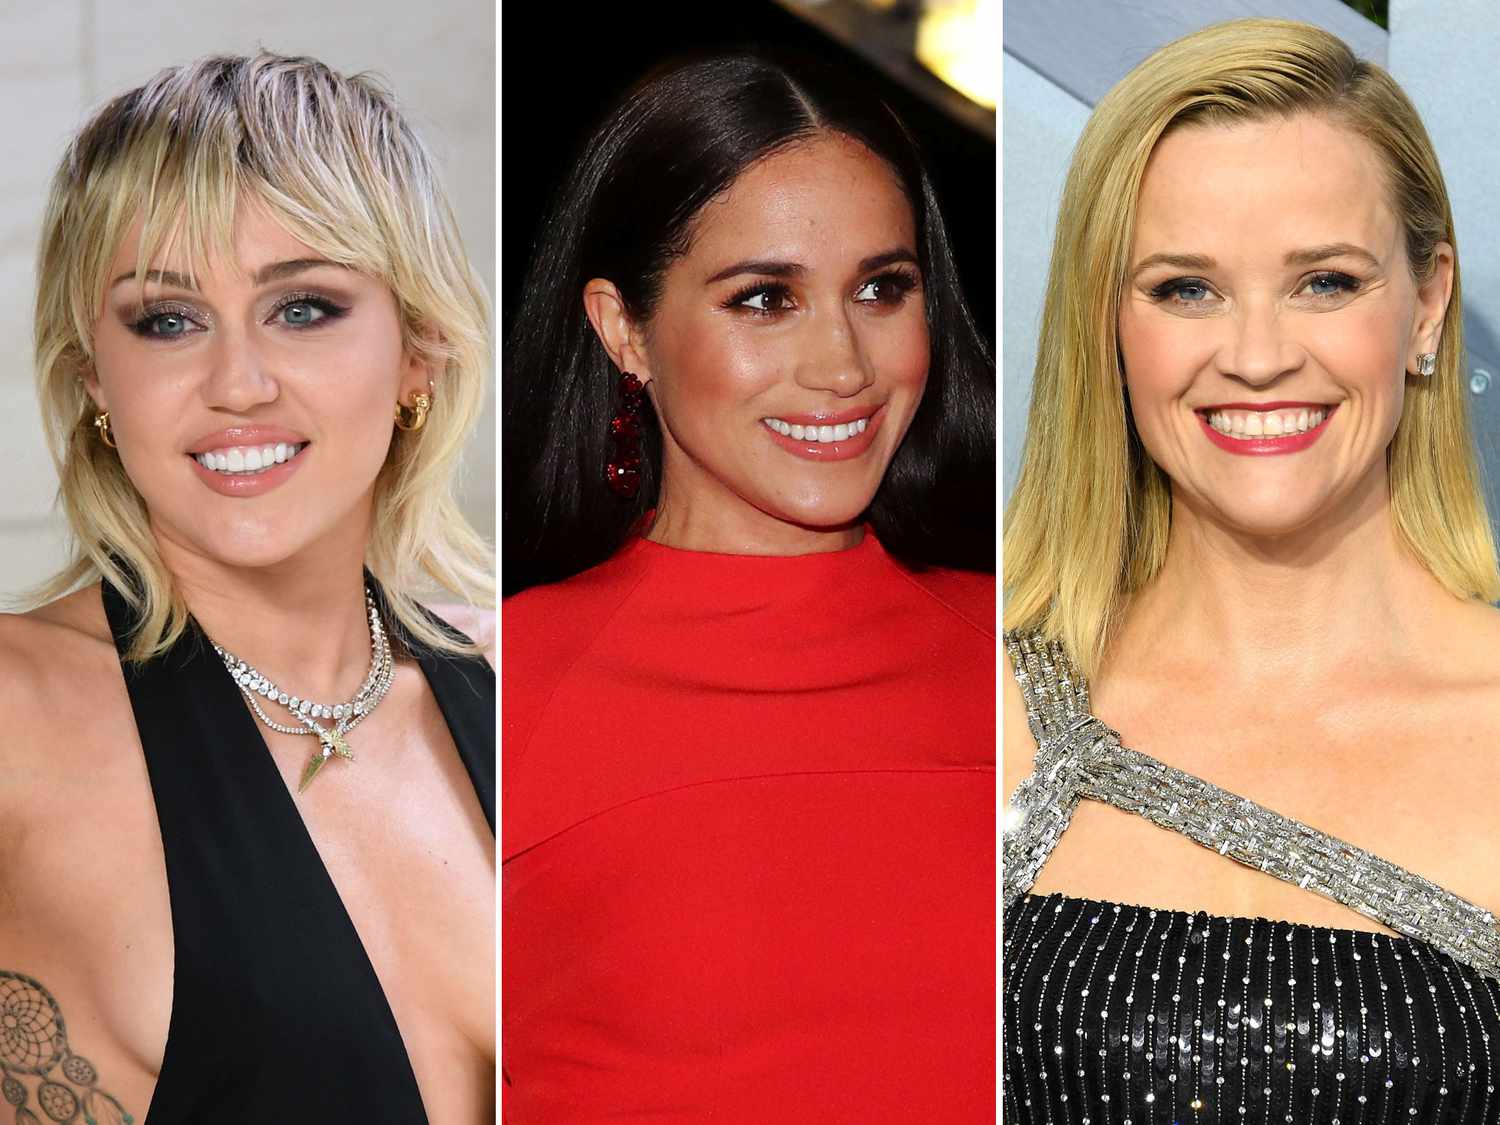 40 of the smartest celebrities in Hollywood